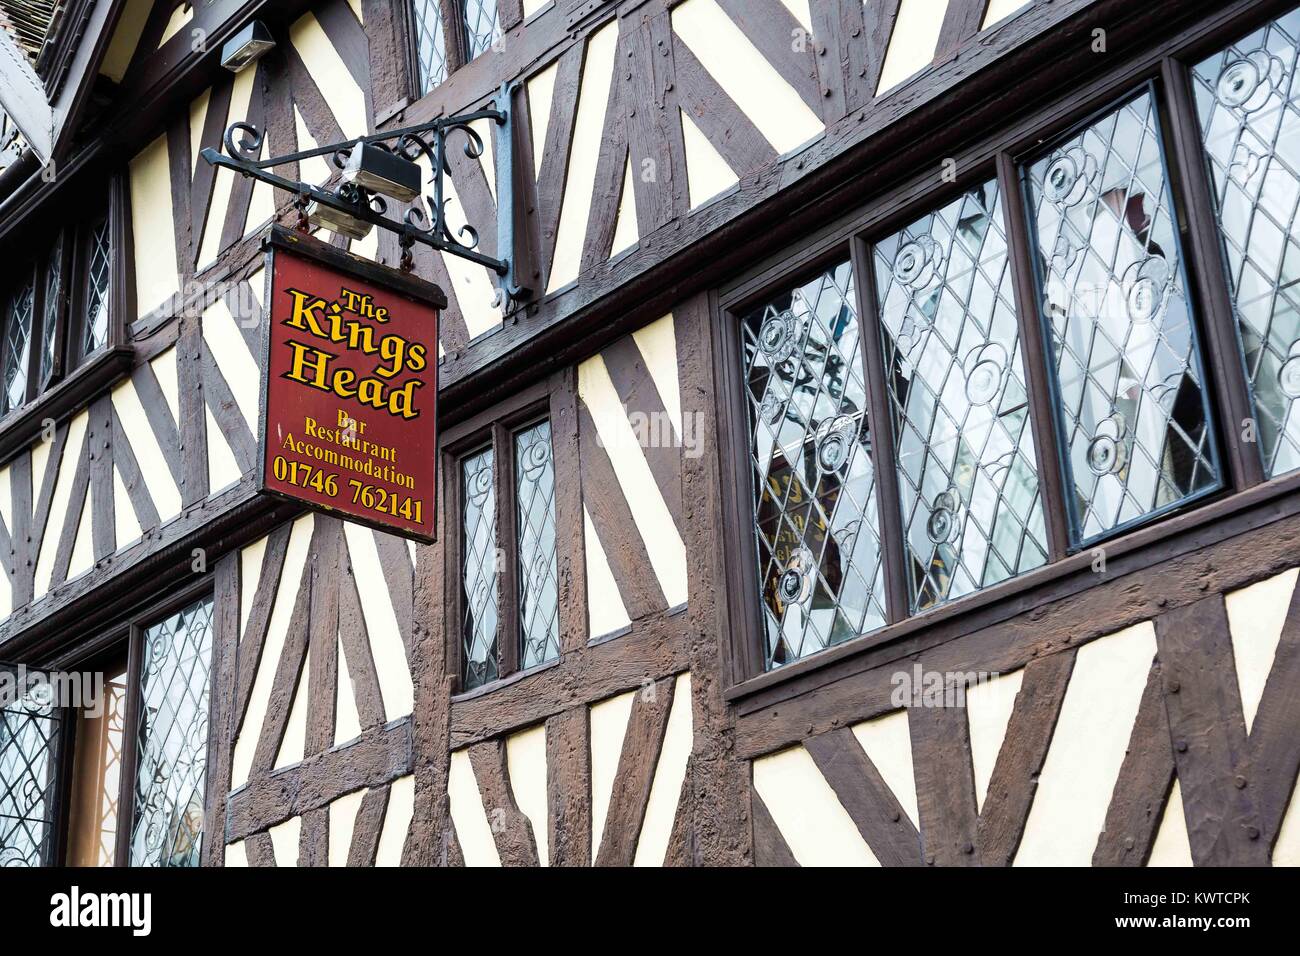 The King's Head Black & white timber framed pub or public house in Bridgnorth, Shropshire Stock Photo